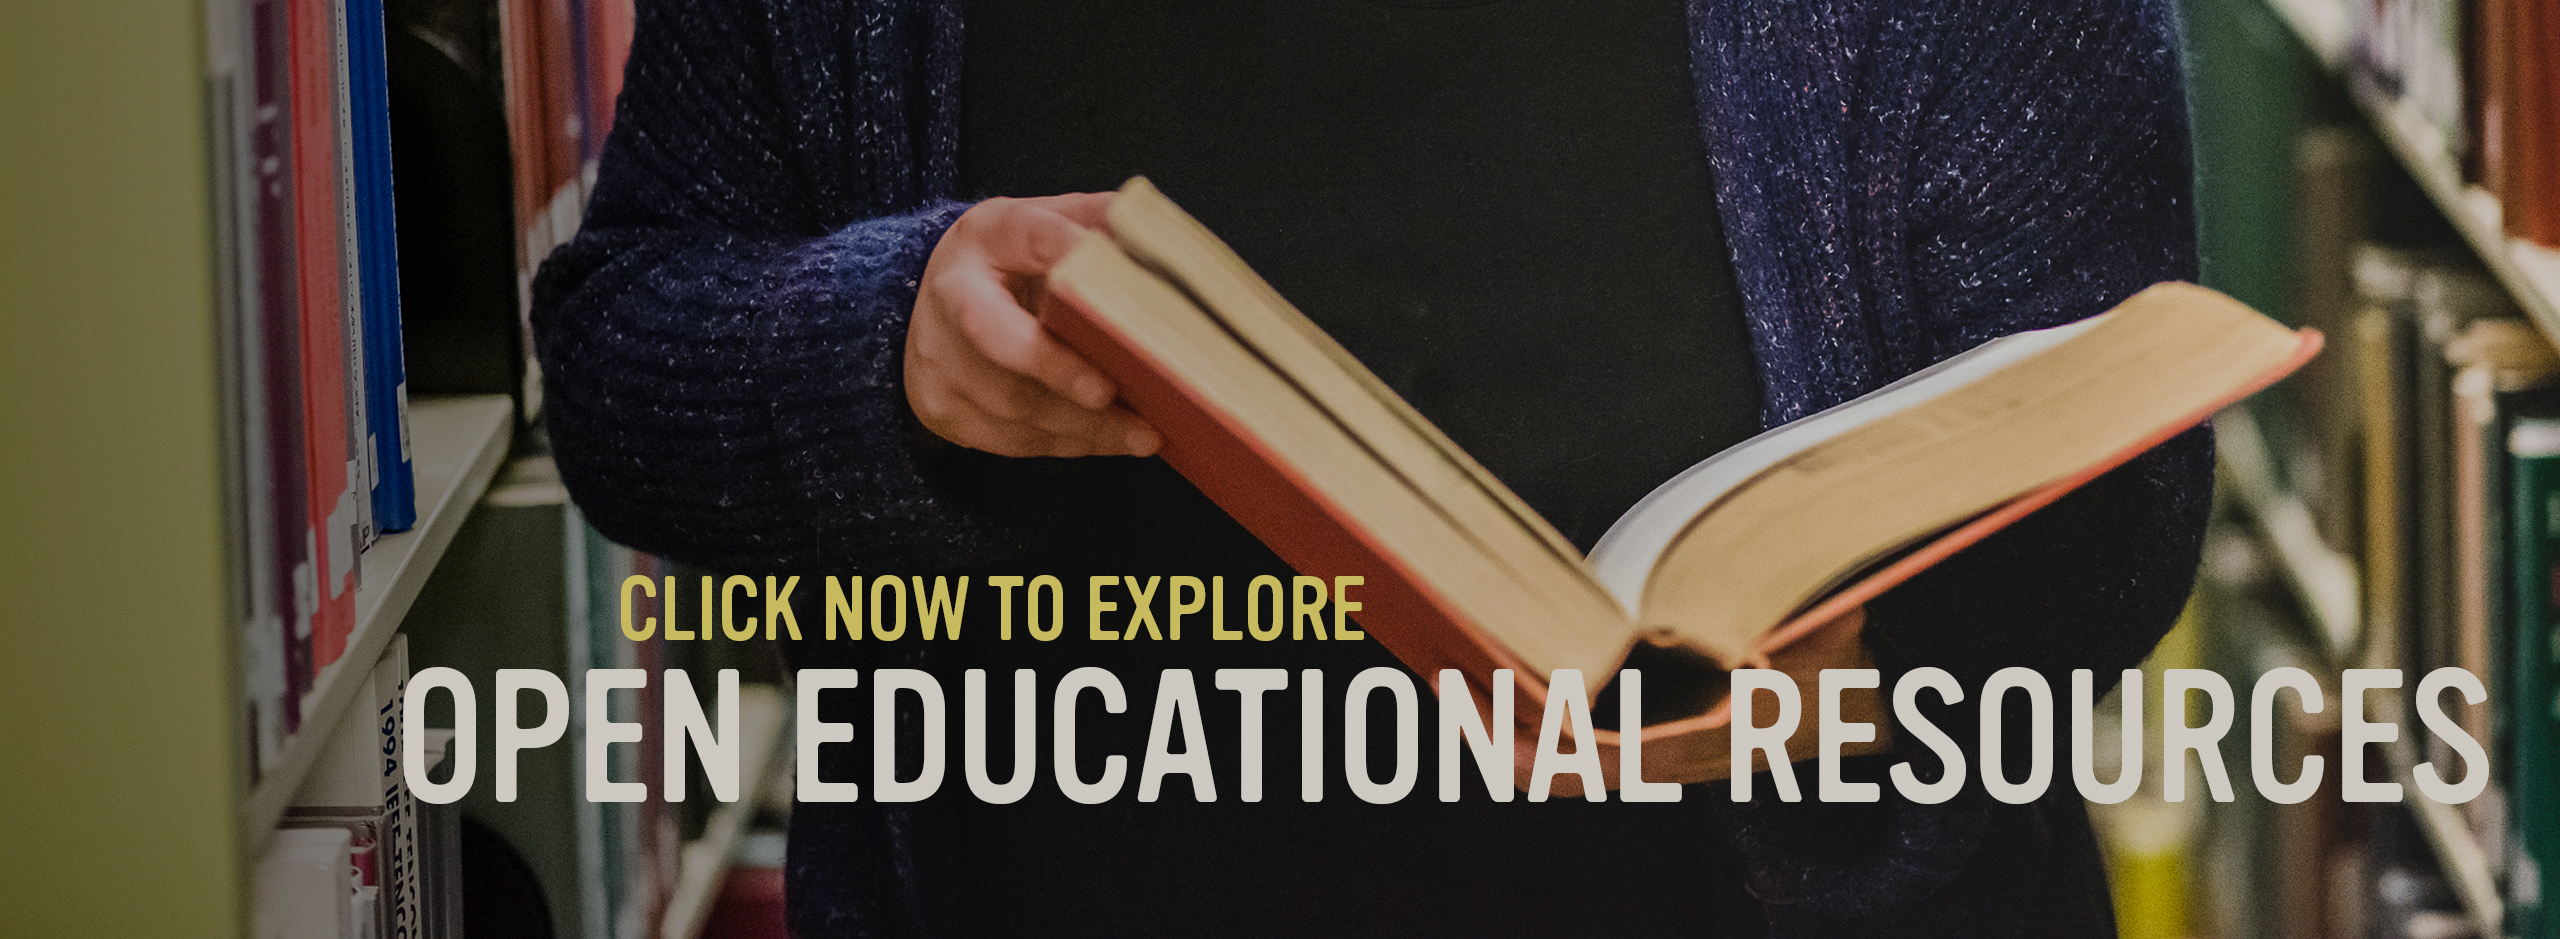 click here to explore open educational resources